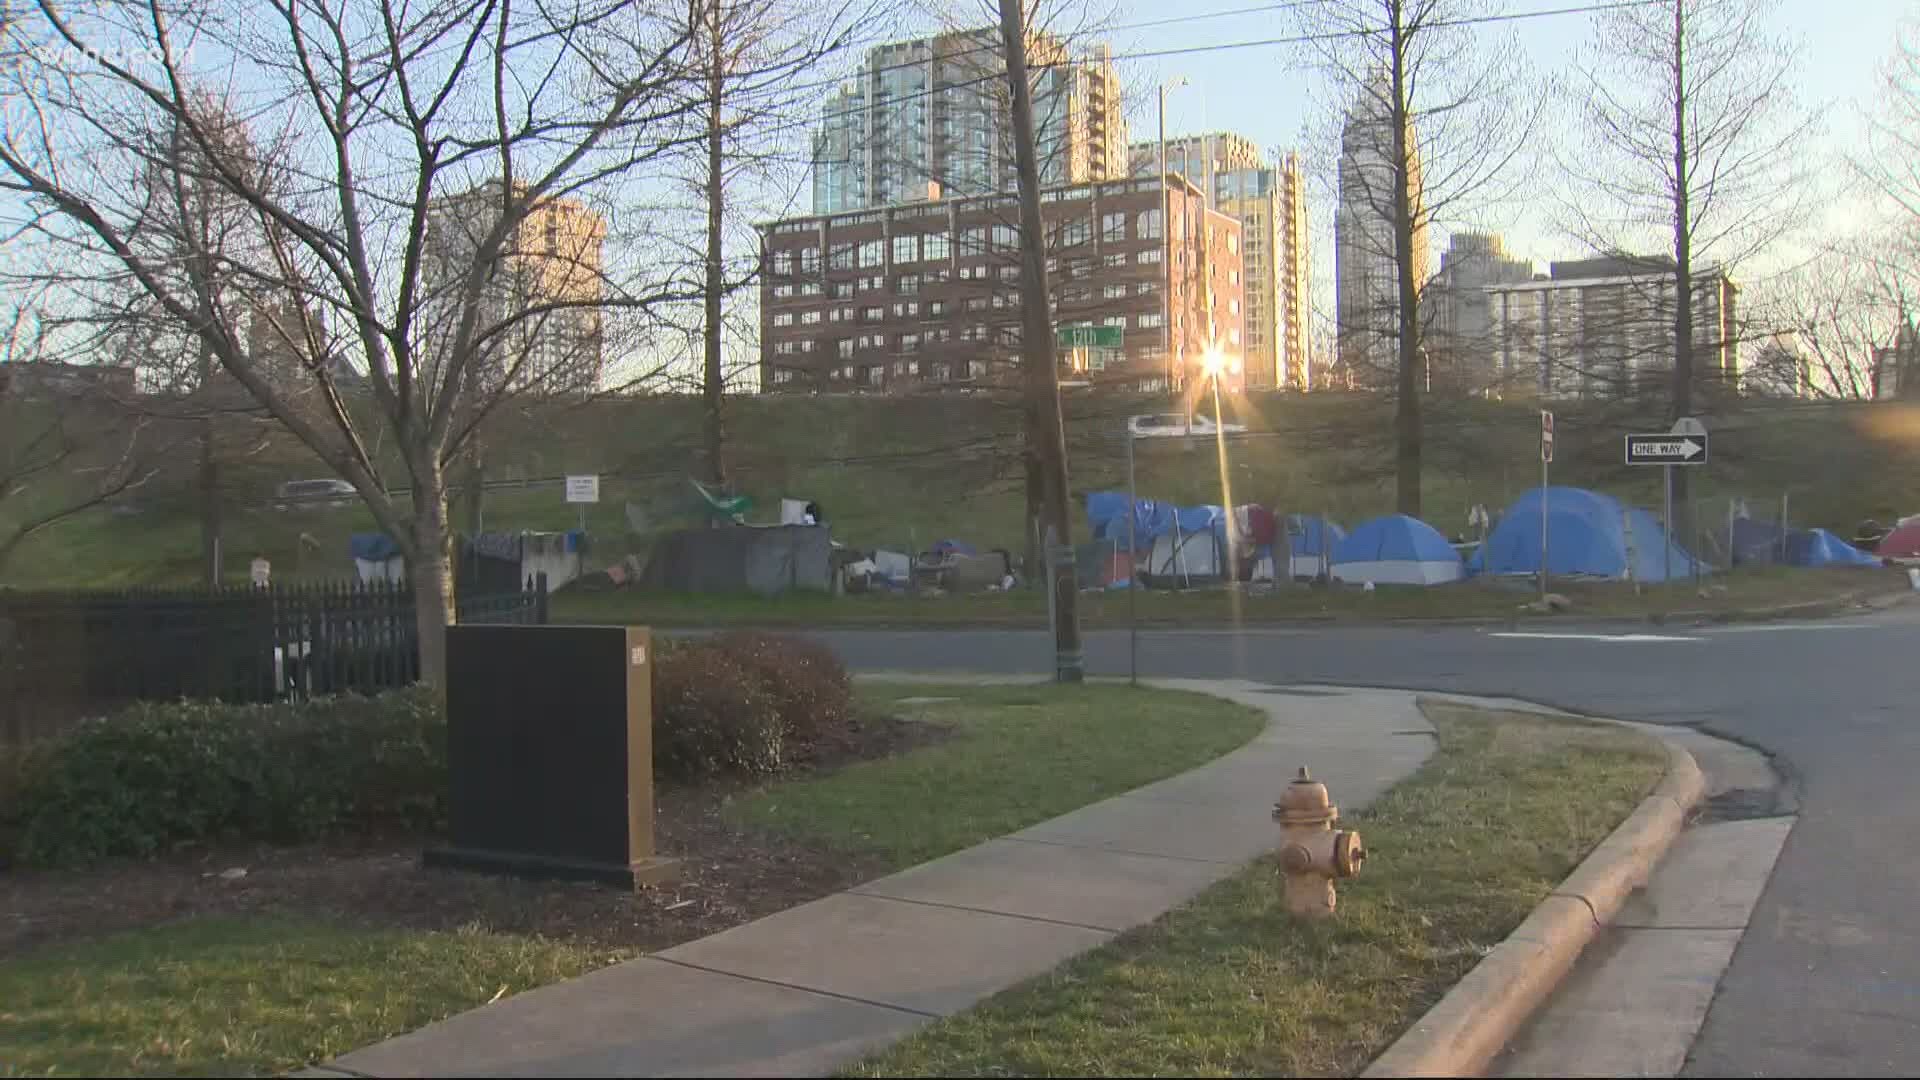 Charlotte leaders are looking at solutions to the city's homelessness with city council wanting to invest millions to fix the issue.